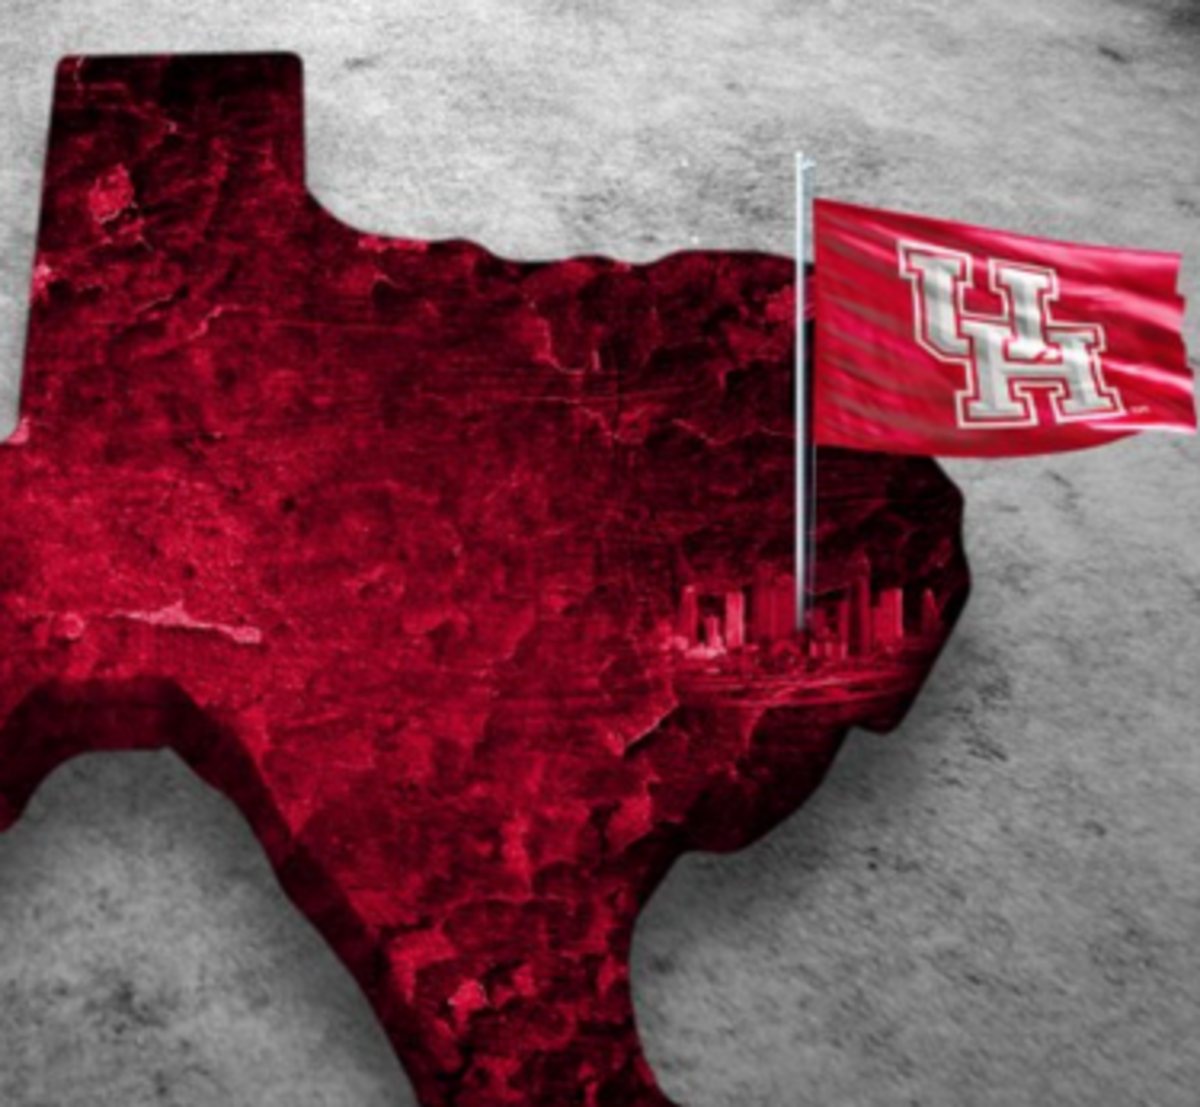 Houston trolls Baylor after loss with Houston flag and red Texas.